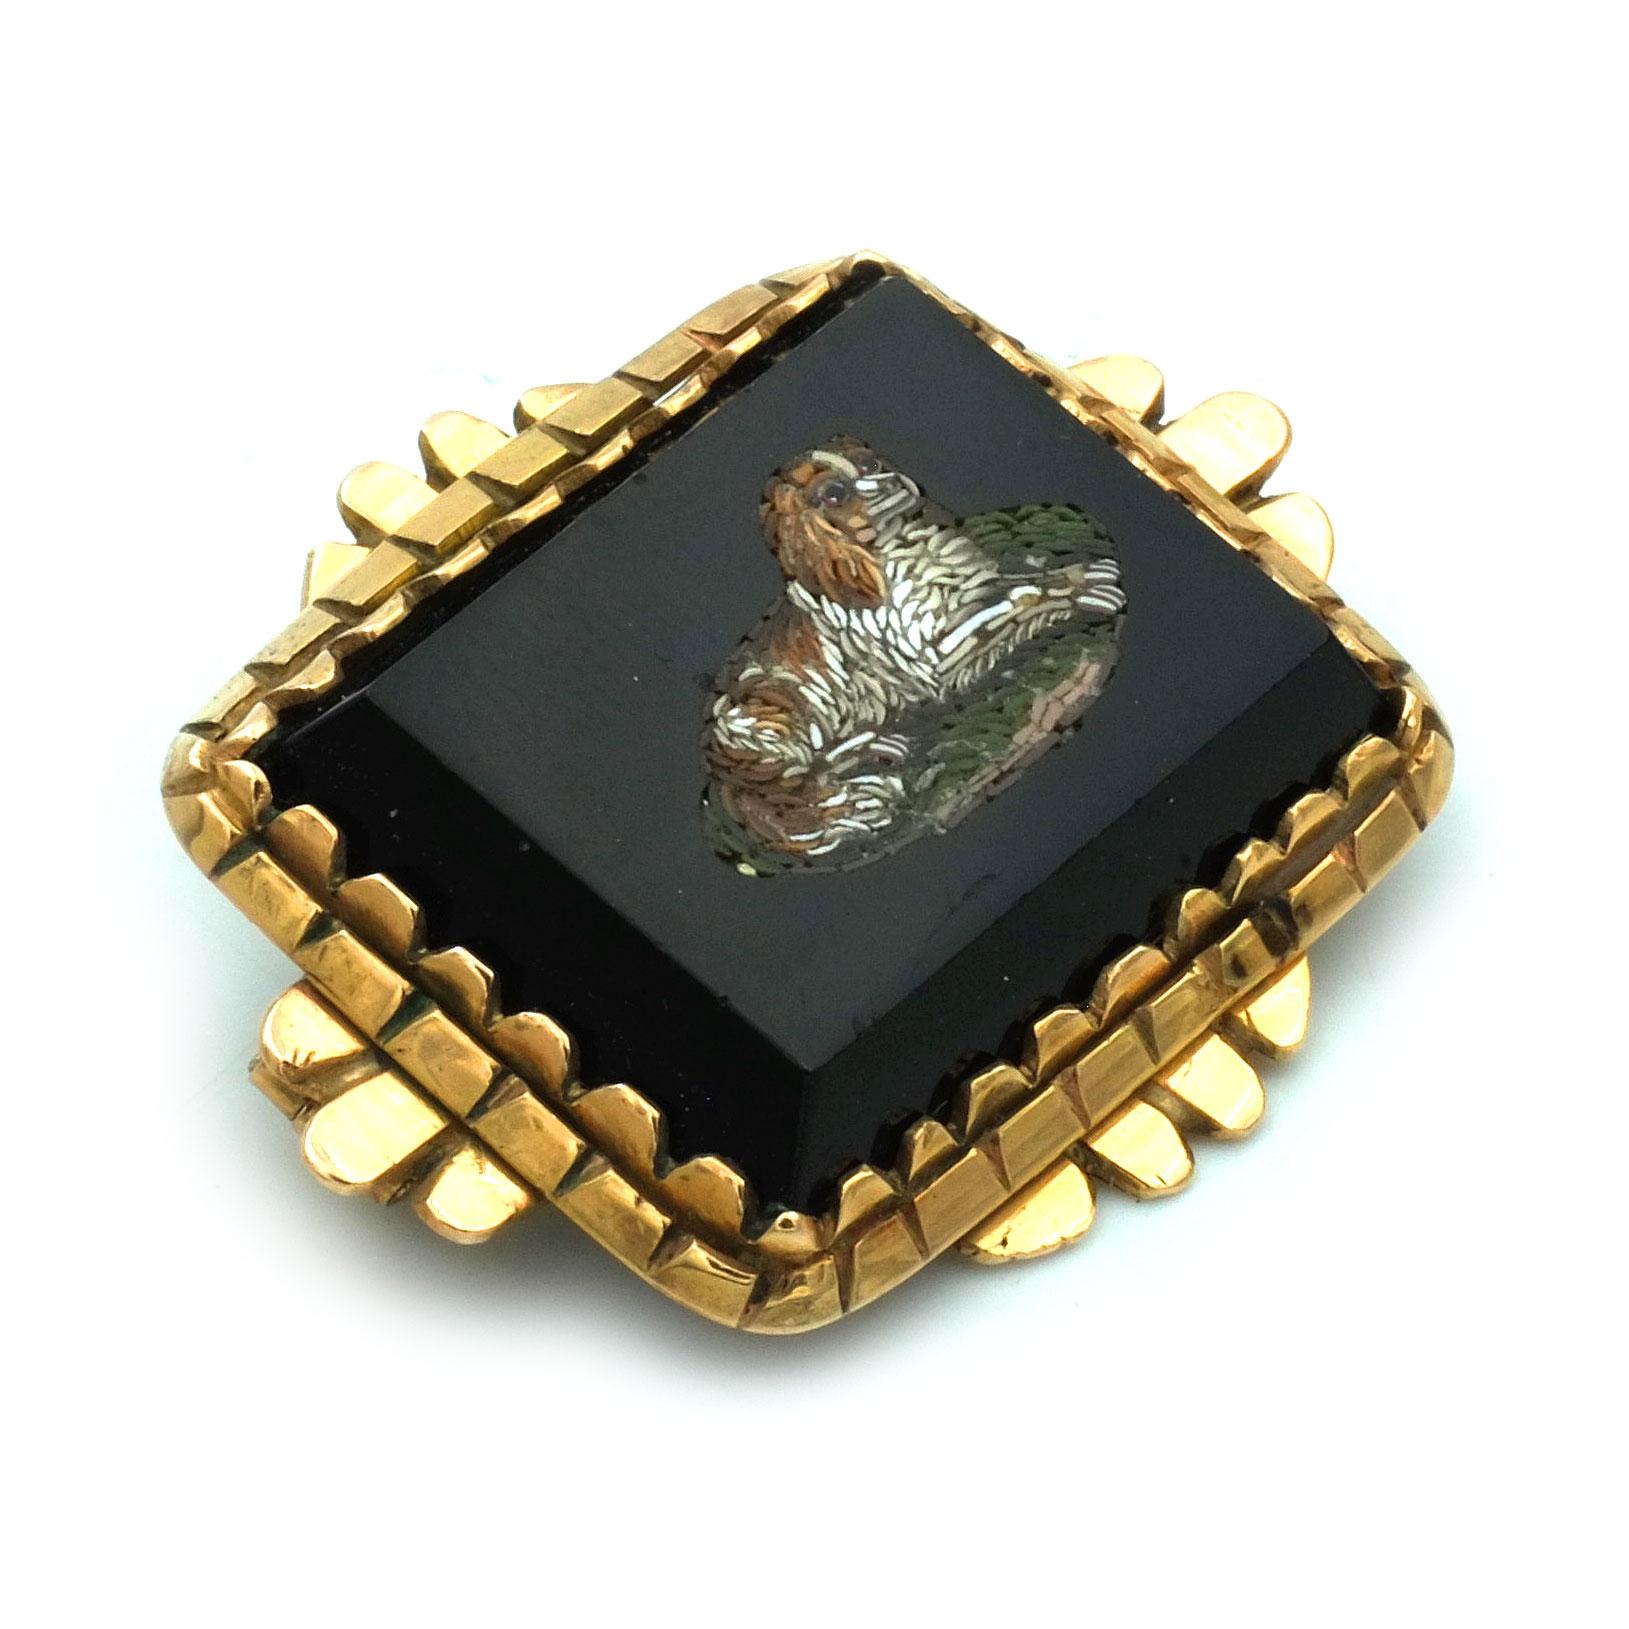 Victorian Micromosaic 14K Gold Brooch Depicting a King Charles Spaniel circa 1870

Delightful micromosaic brooch set in a gold frame. The fine inlaid work of colored glass mosaic on a black onyx depicting a lying dog, a little King Charles Spaniel.